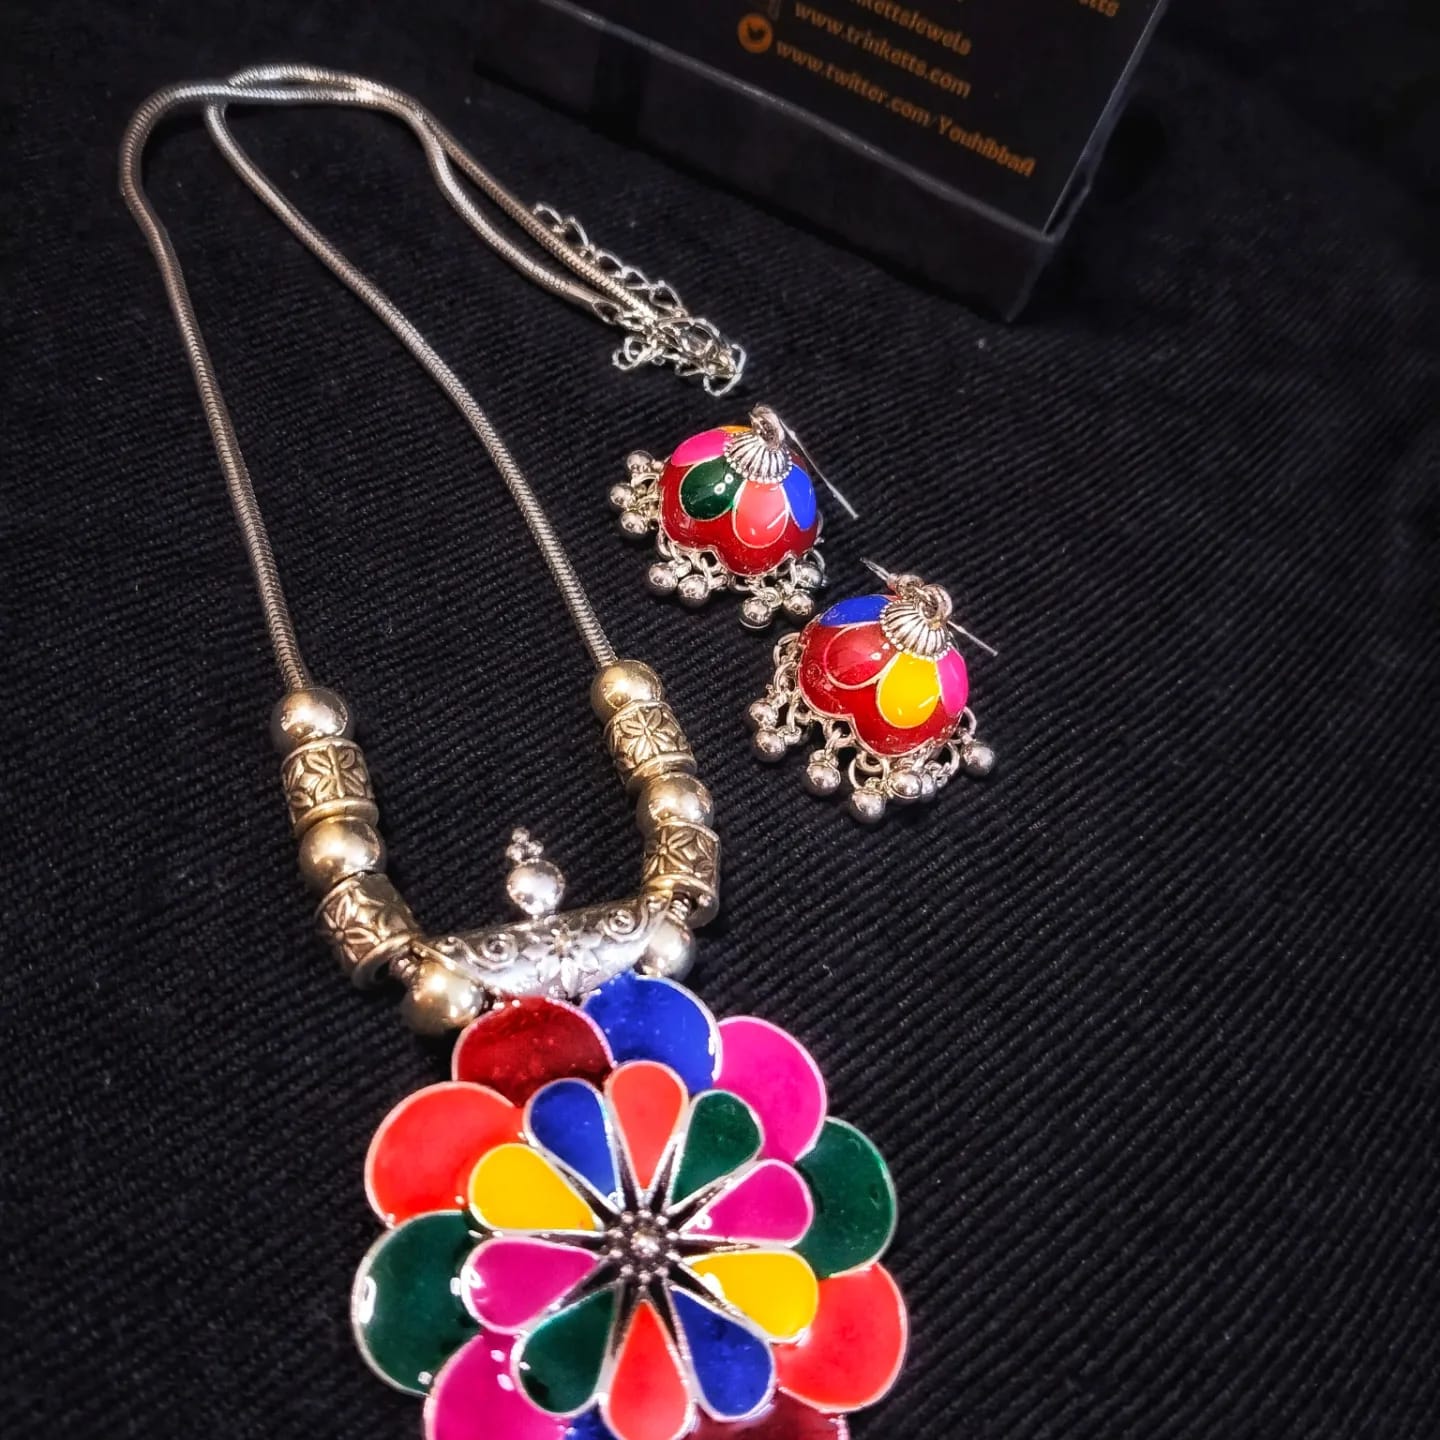 A floral-shaped pendant in multi colours Meena Kaari design, accompanied by matching Meena Karai jhumkis (dangling earrings) in multi colours, featuring attached ghungroos (small bells). The pendant hangs on an oxidized silver chain with an S hook closure.